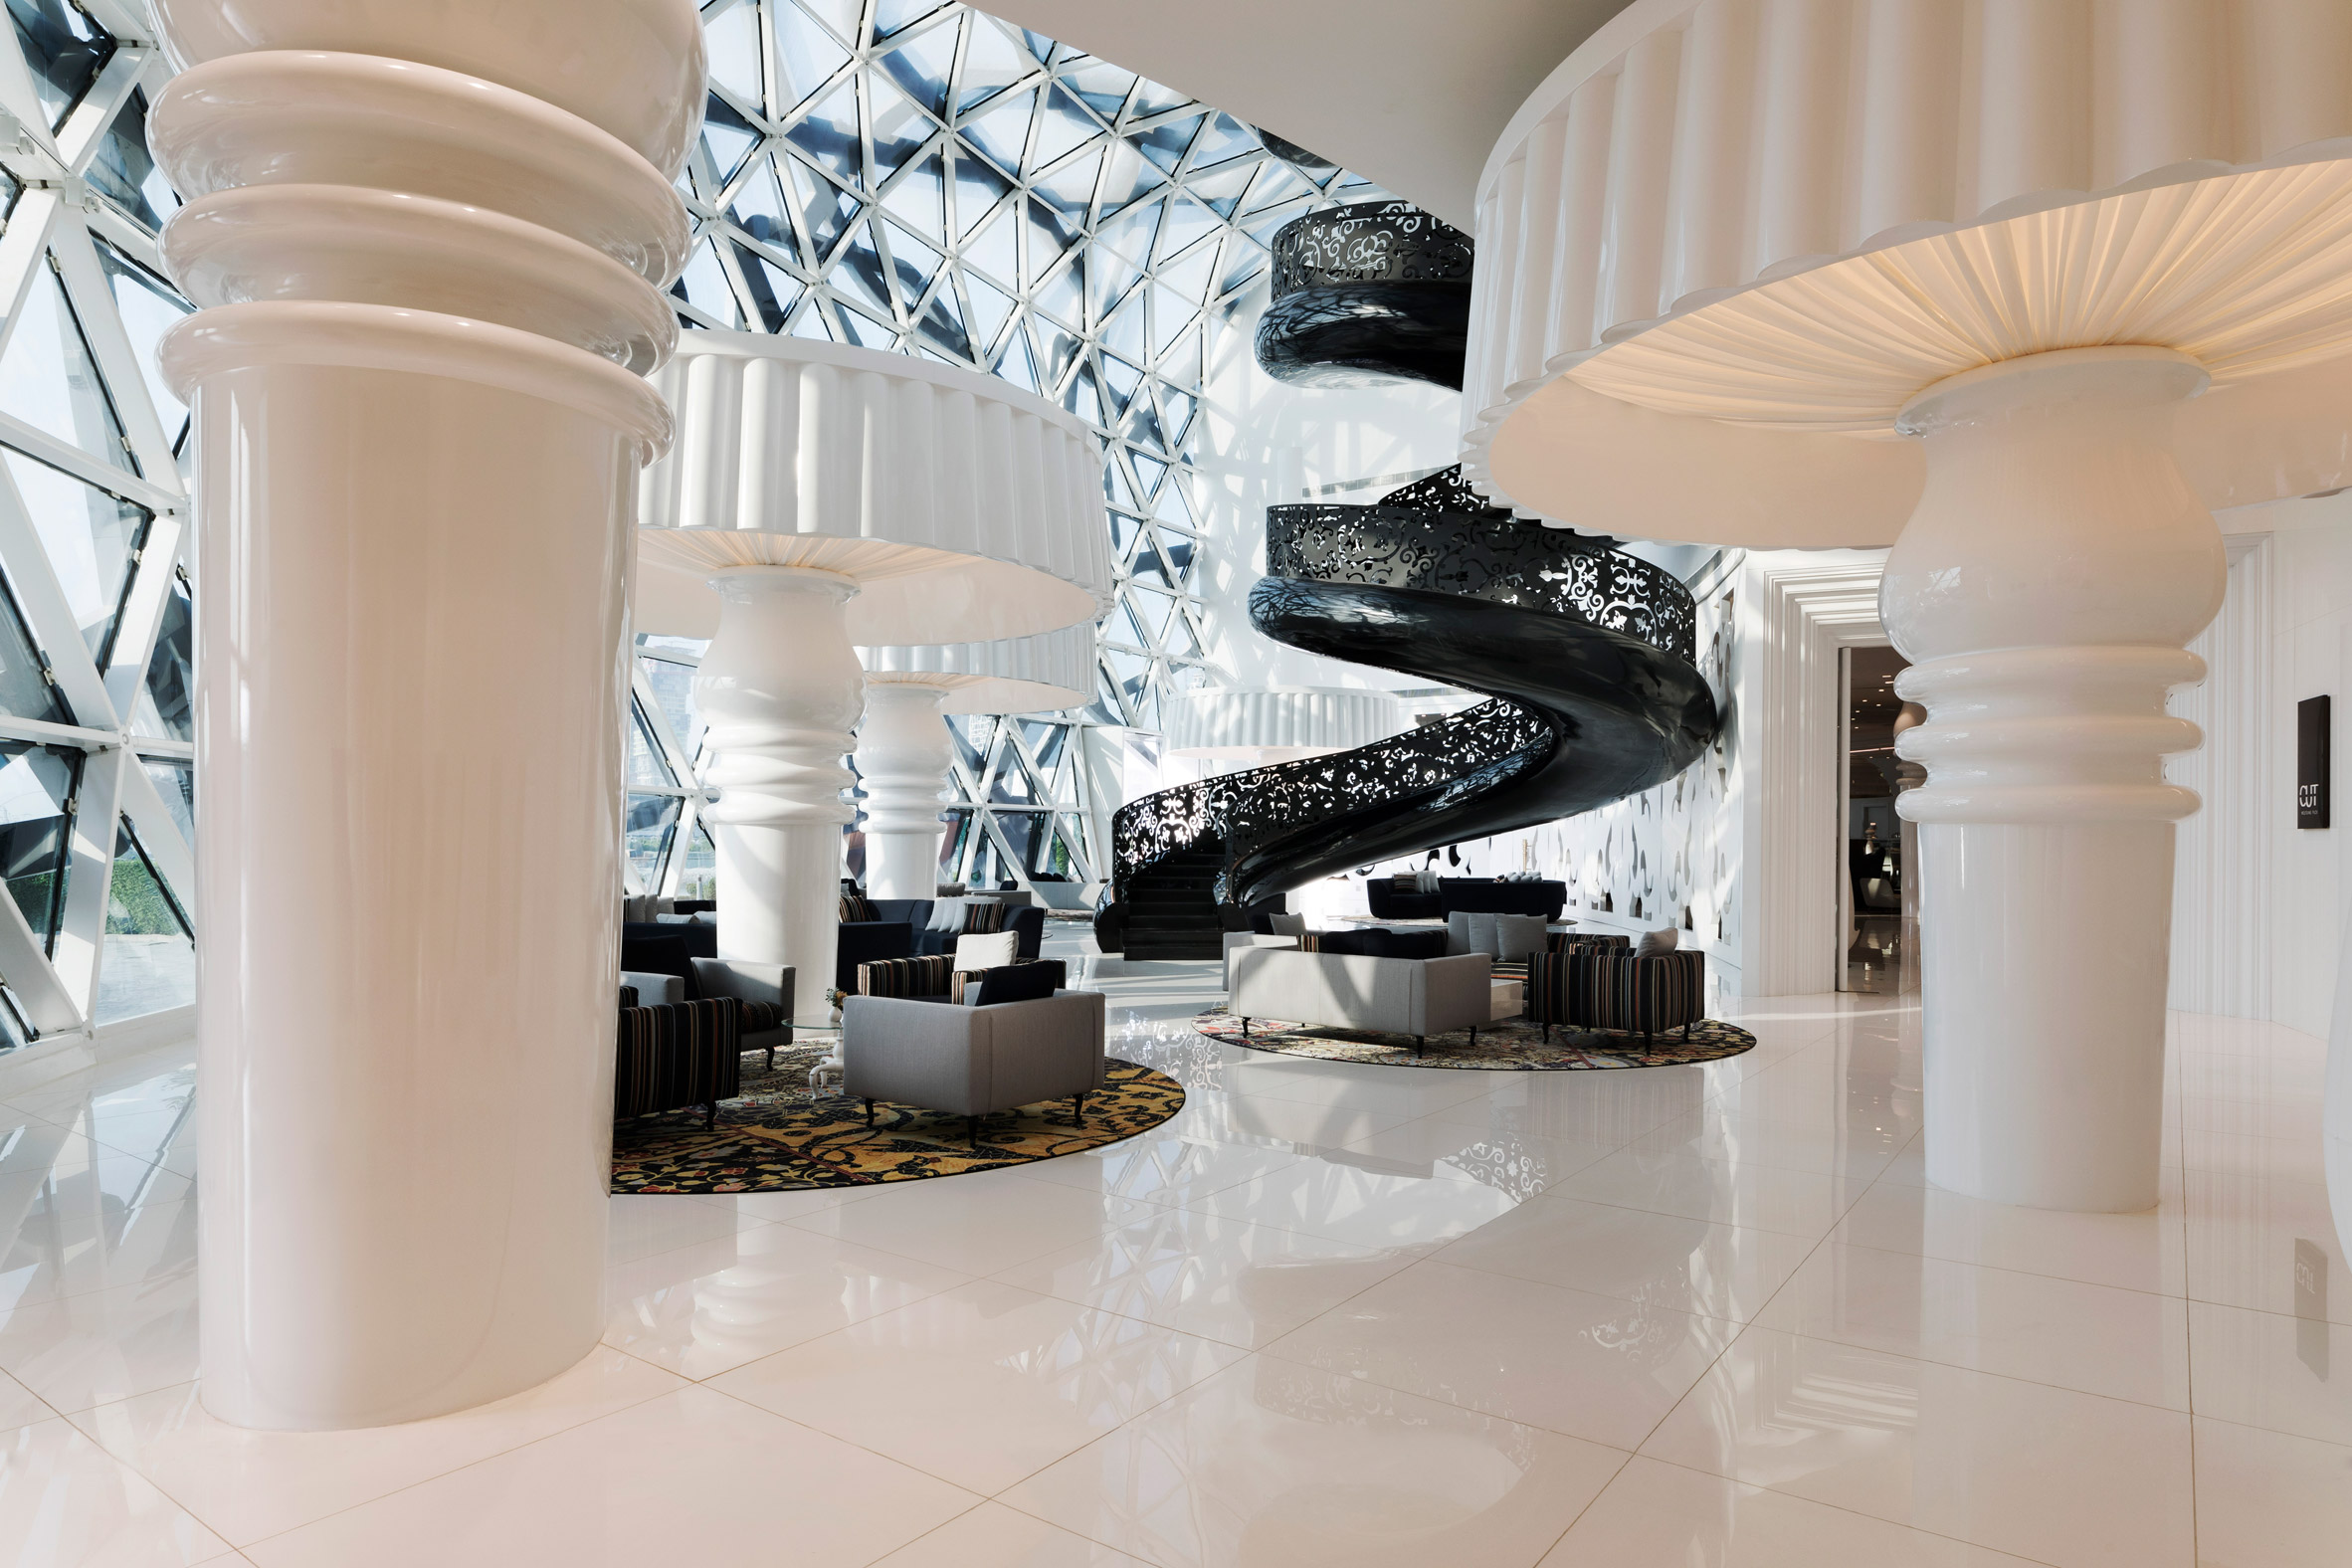 Marcel Wanders draws on Dutch history for Schiphol VIP centre overhaul